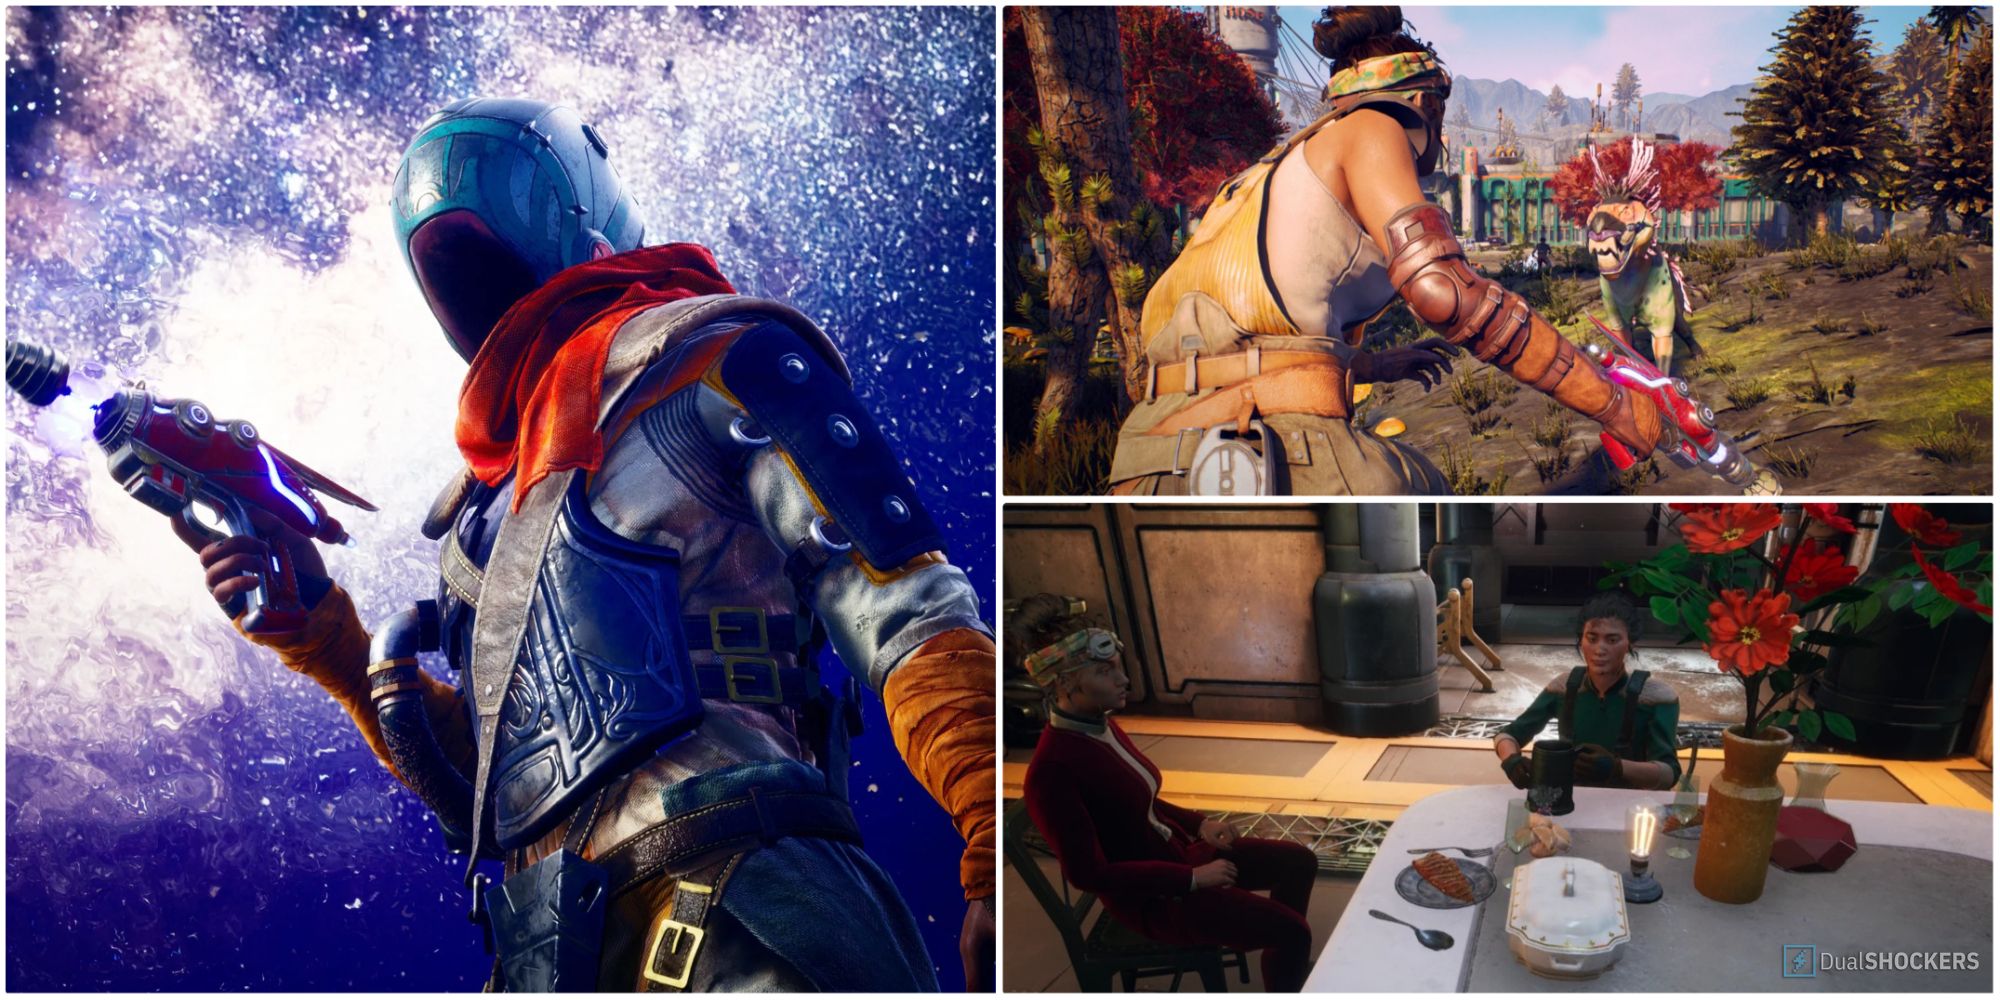 A Collage Of Images From The Outer Worlds Quests